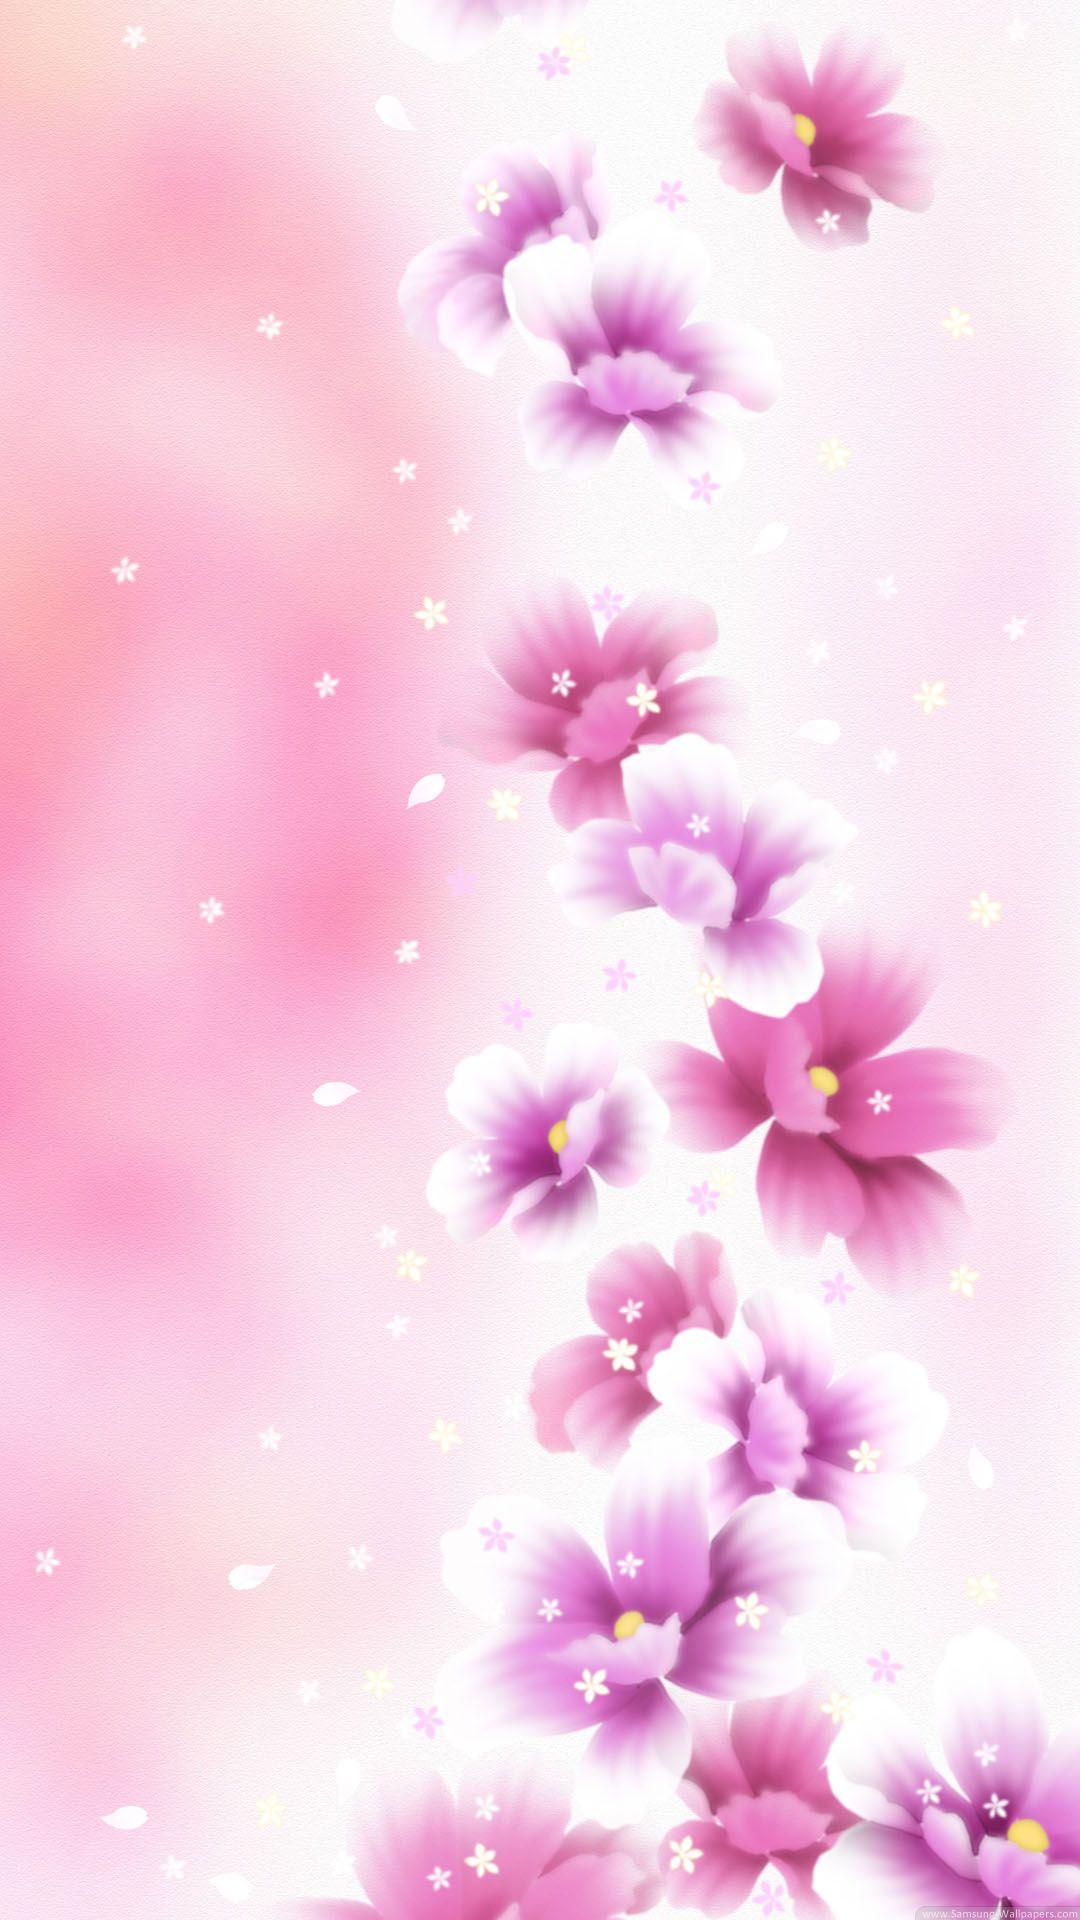 Cute Pink Wallpaper For Mobile